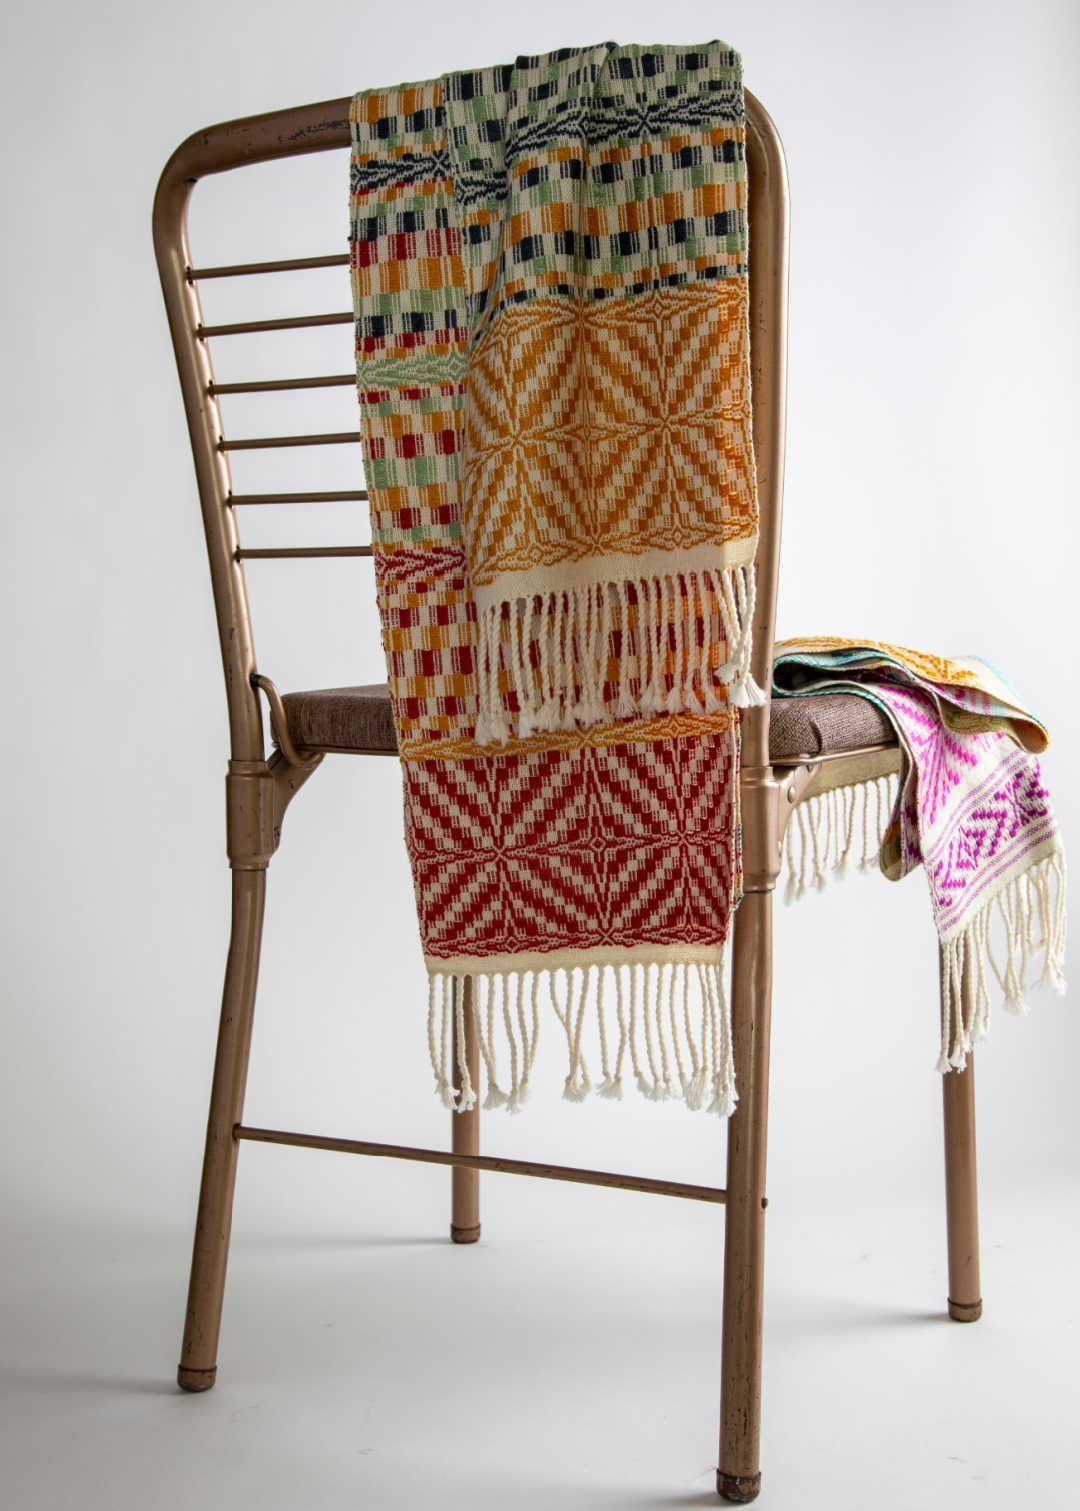 Overshot redux scarf on chair